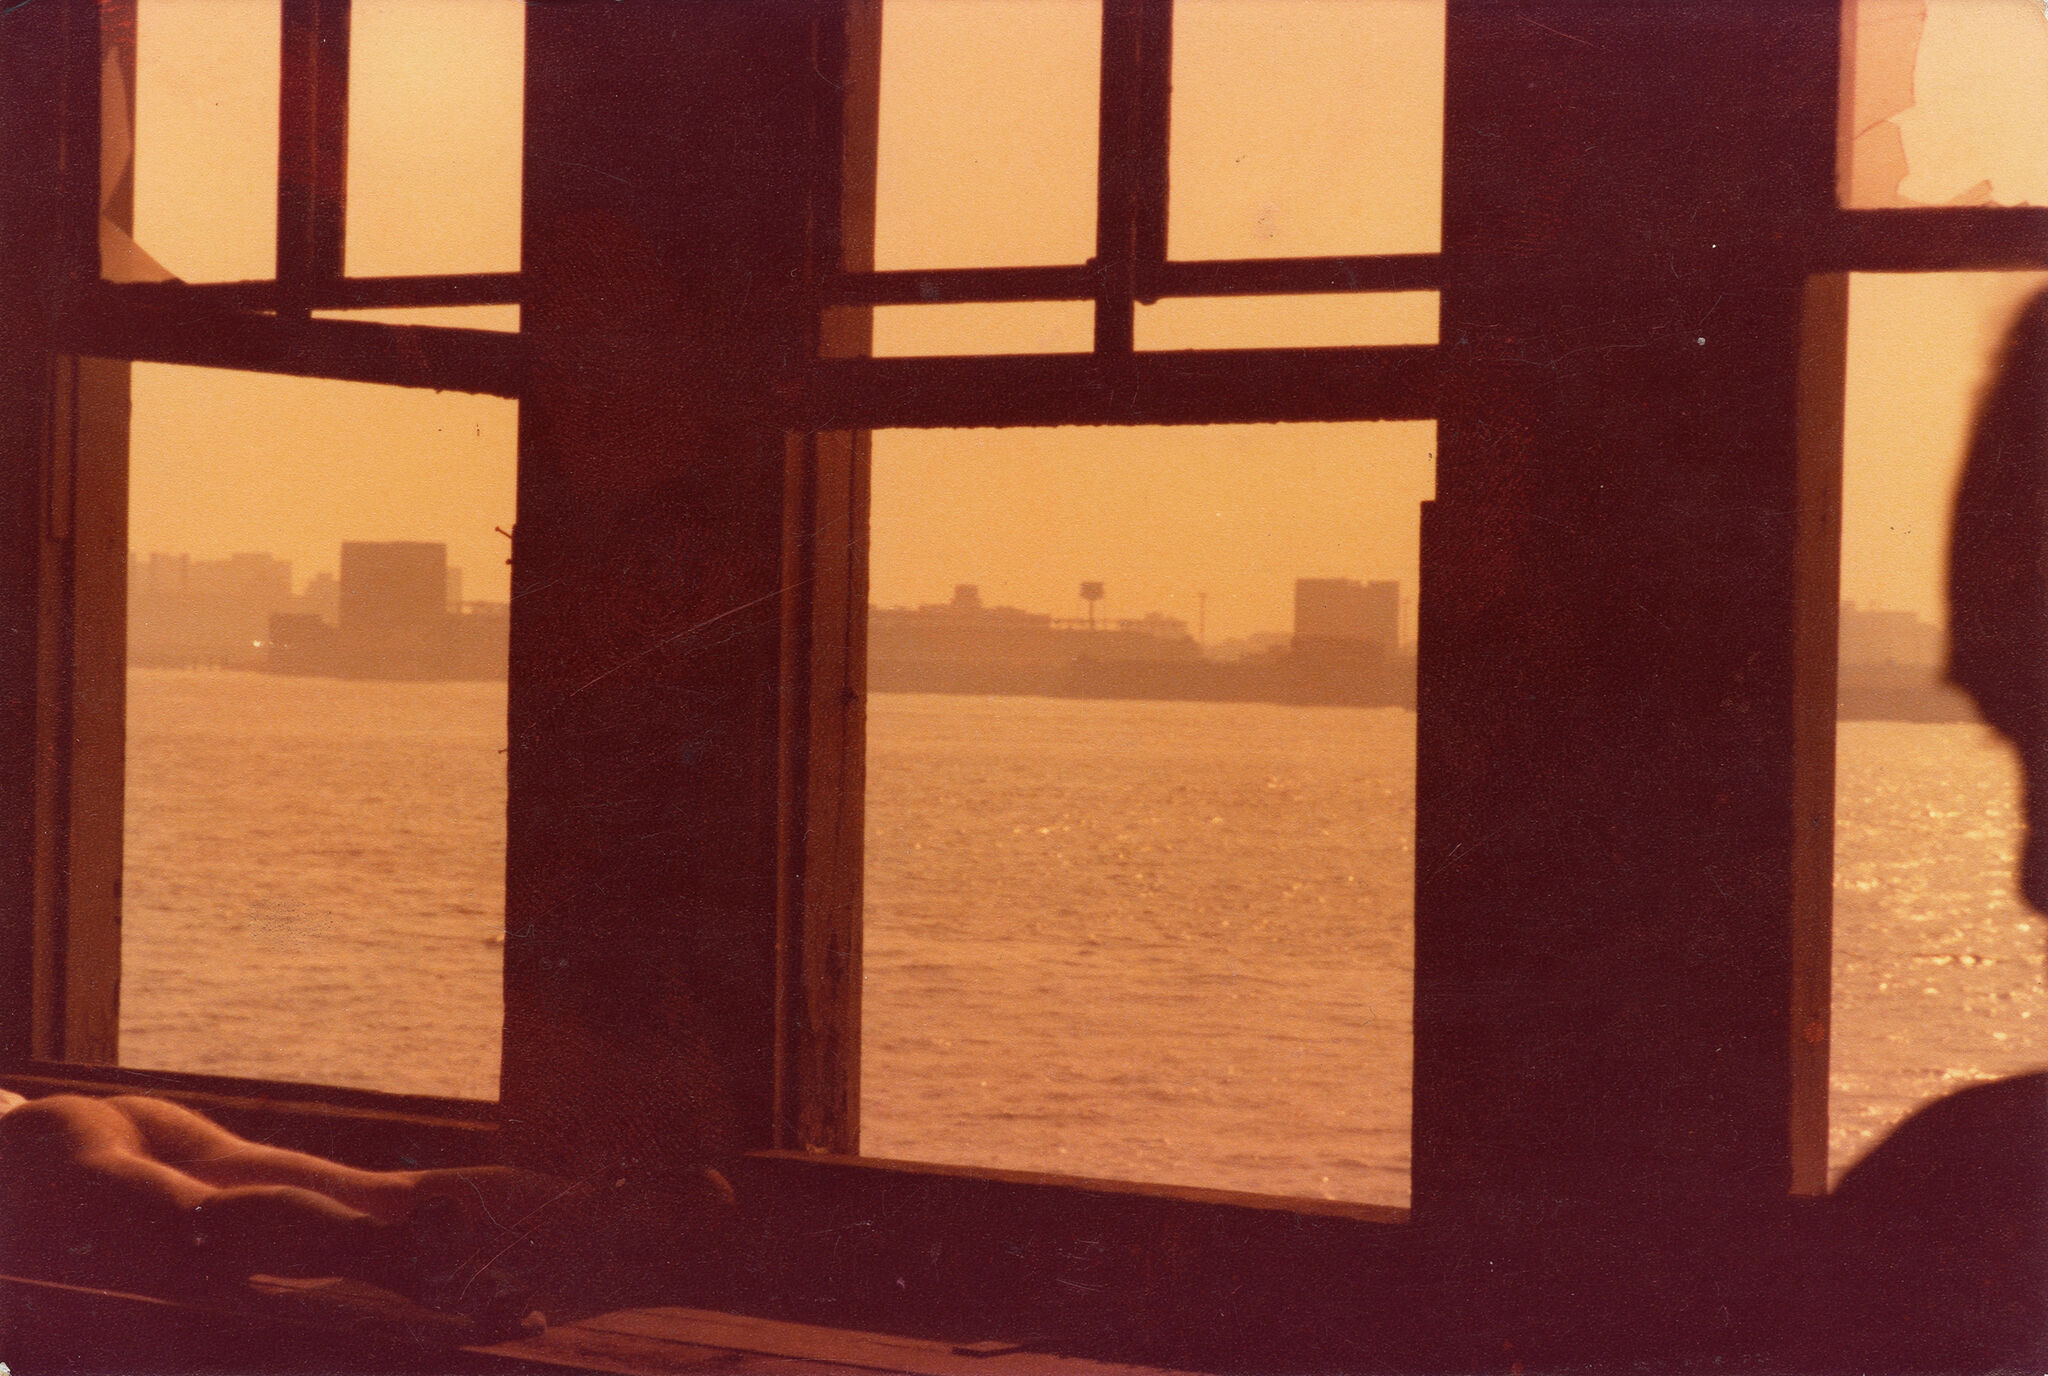 The lower half of a naked person in front of windows overlooking the water all cast in an orange light.